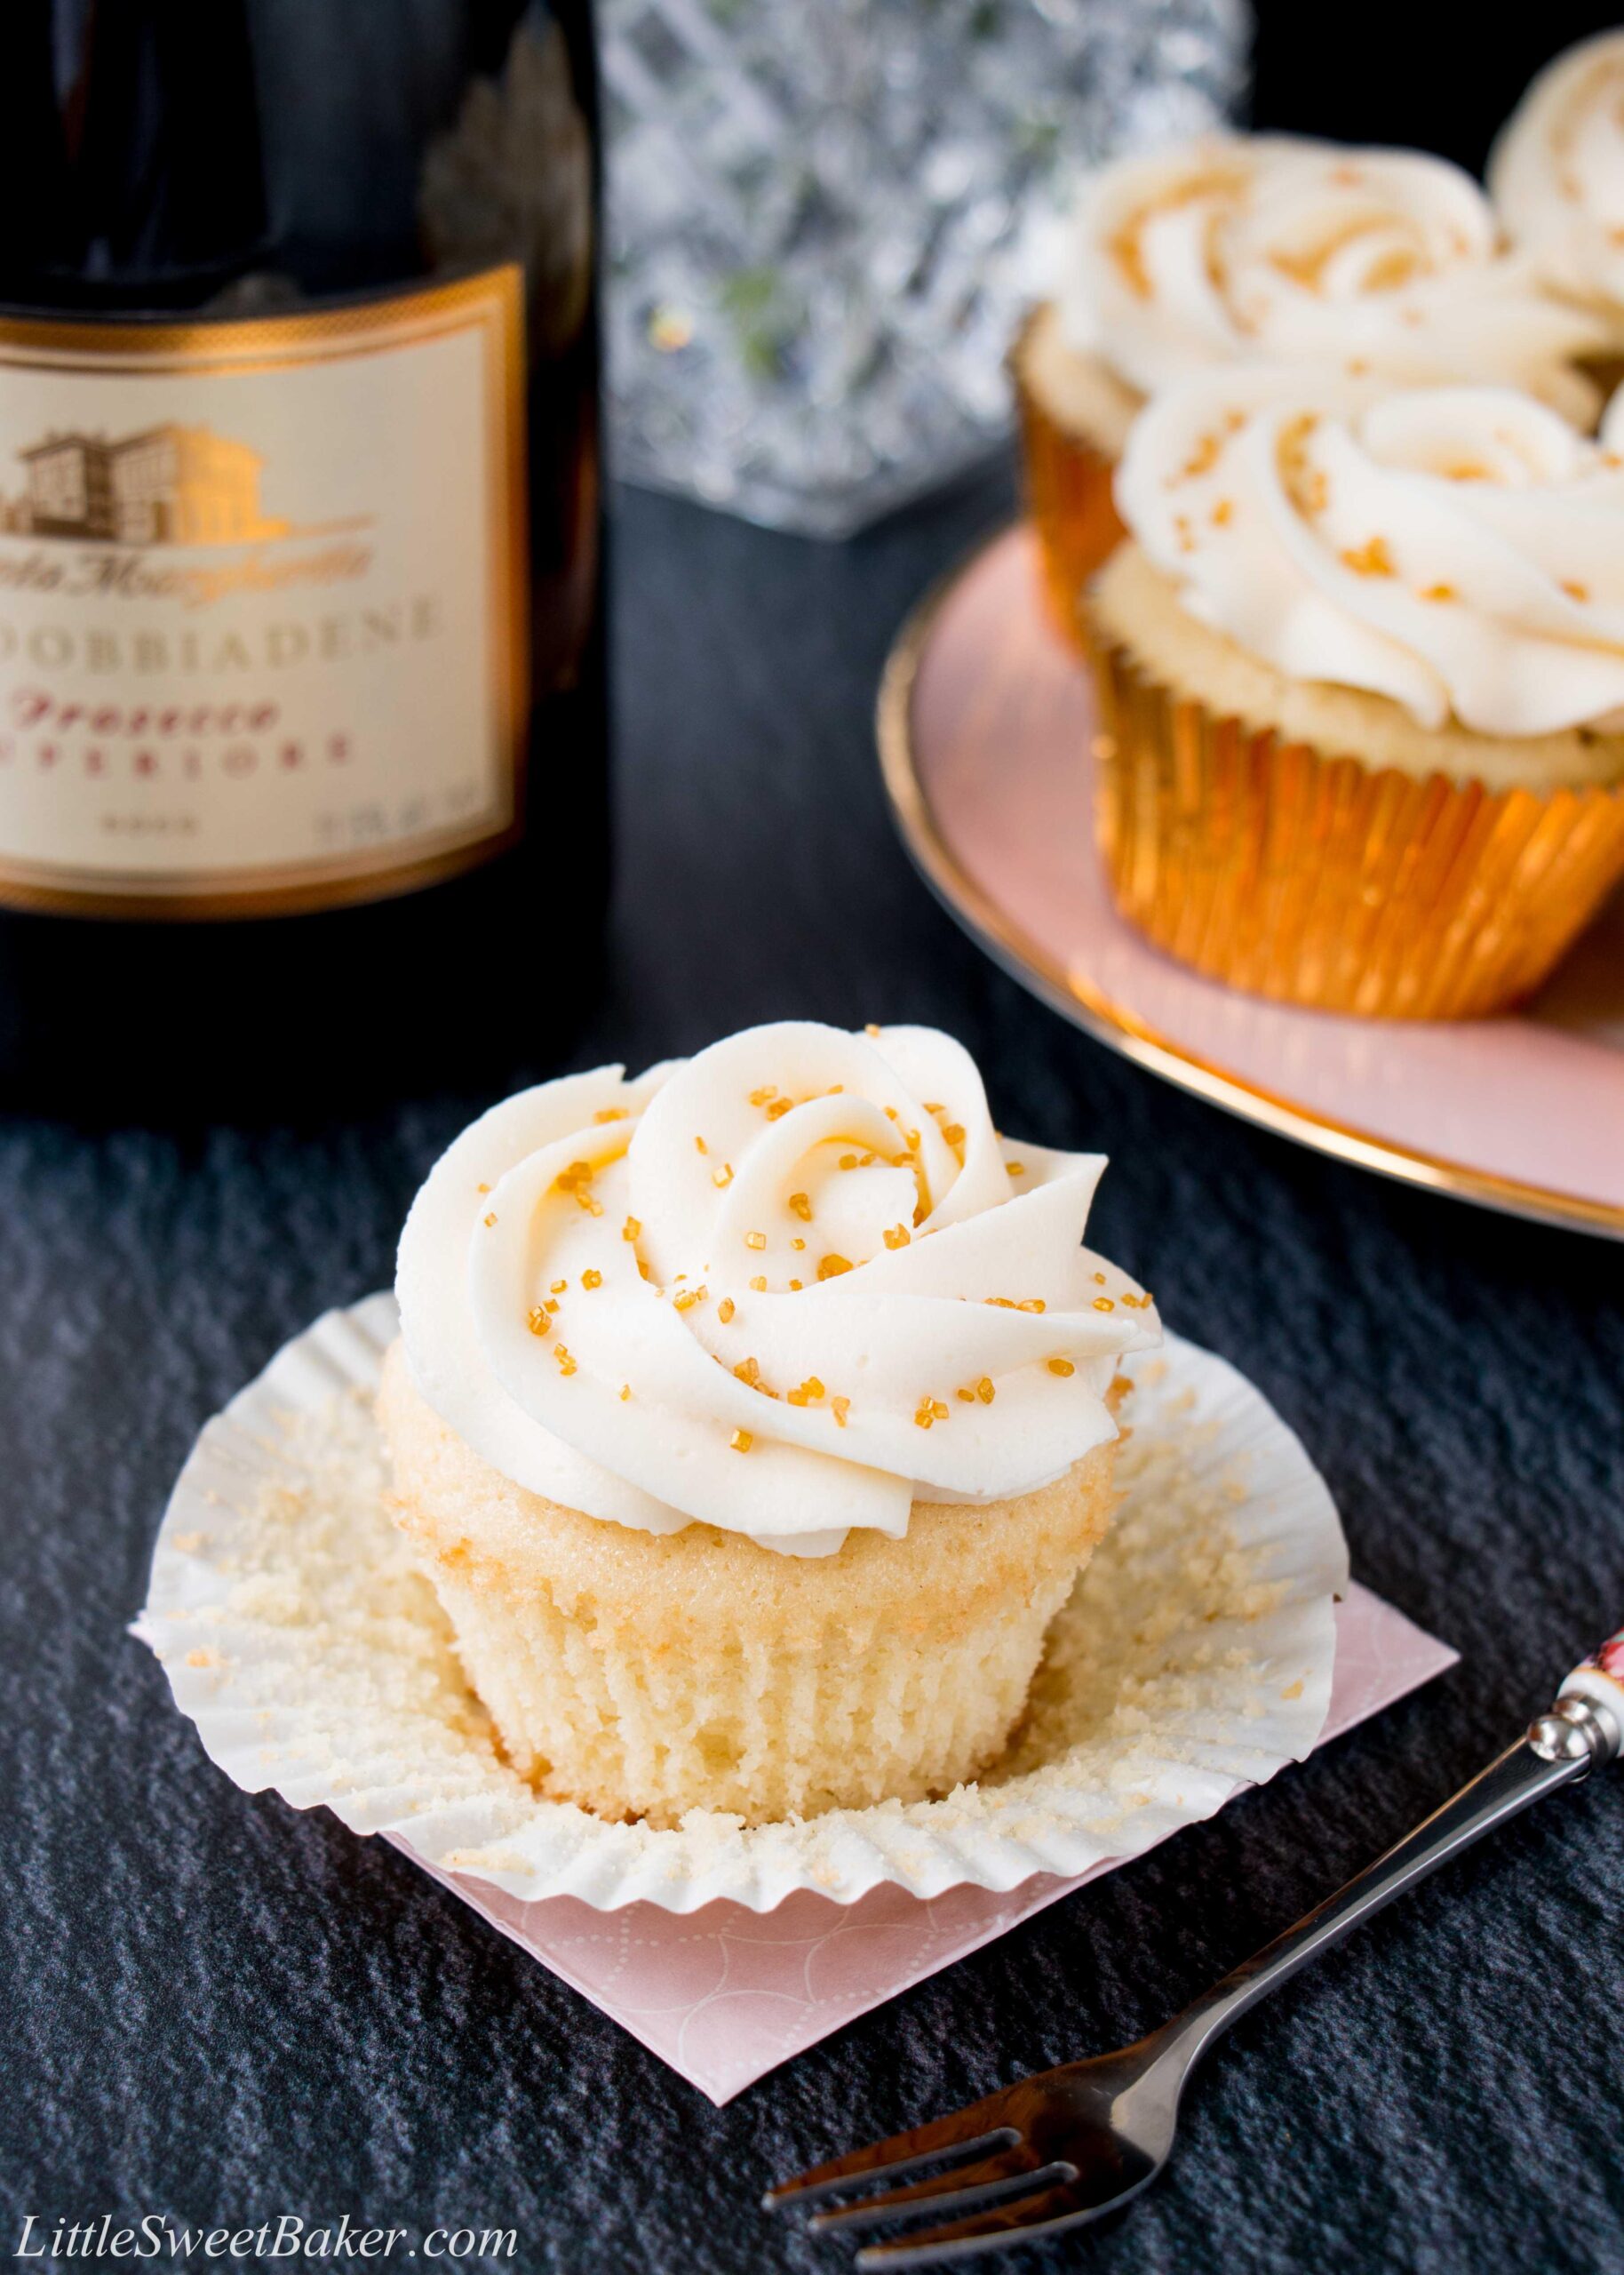  Bubbly in my glass and in my dessert - these Champagne cupcakes are a party in a wrapper.